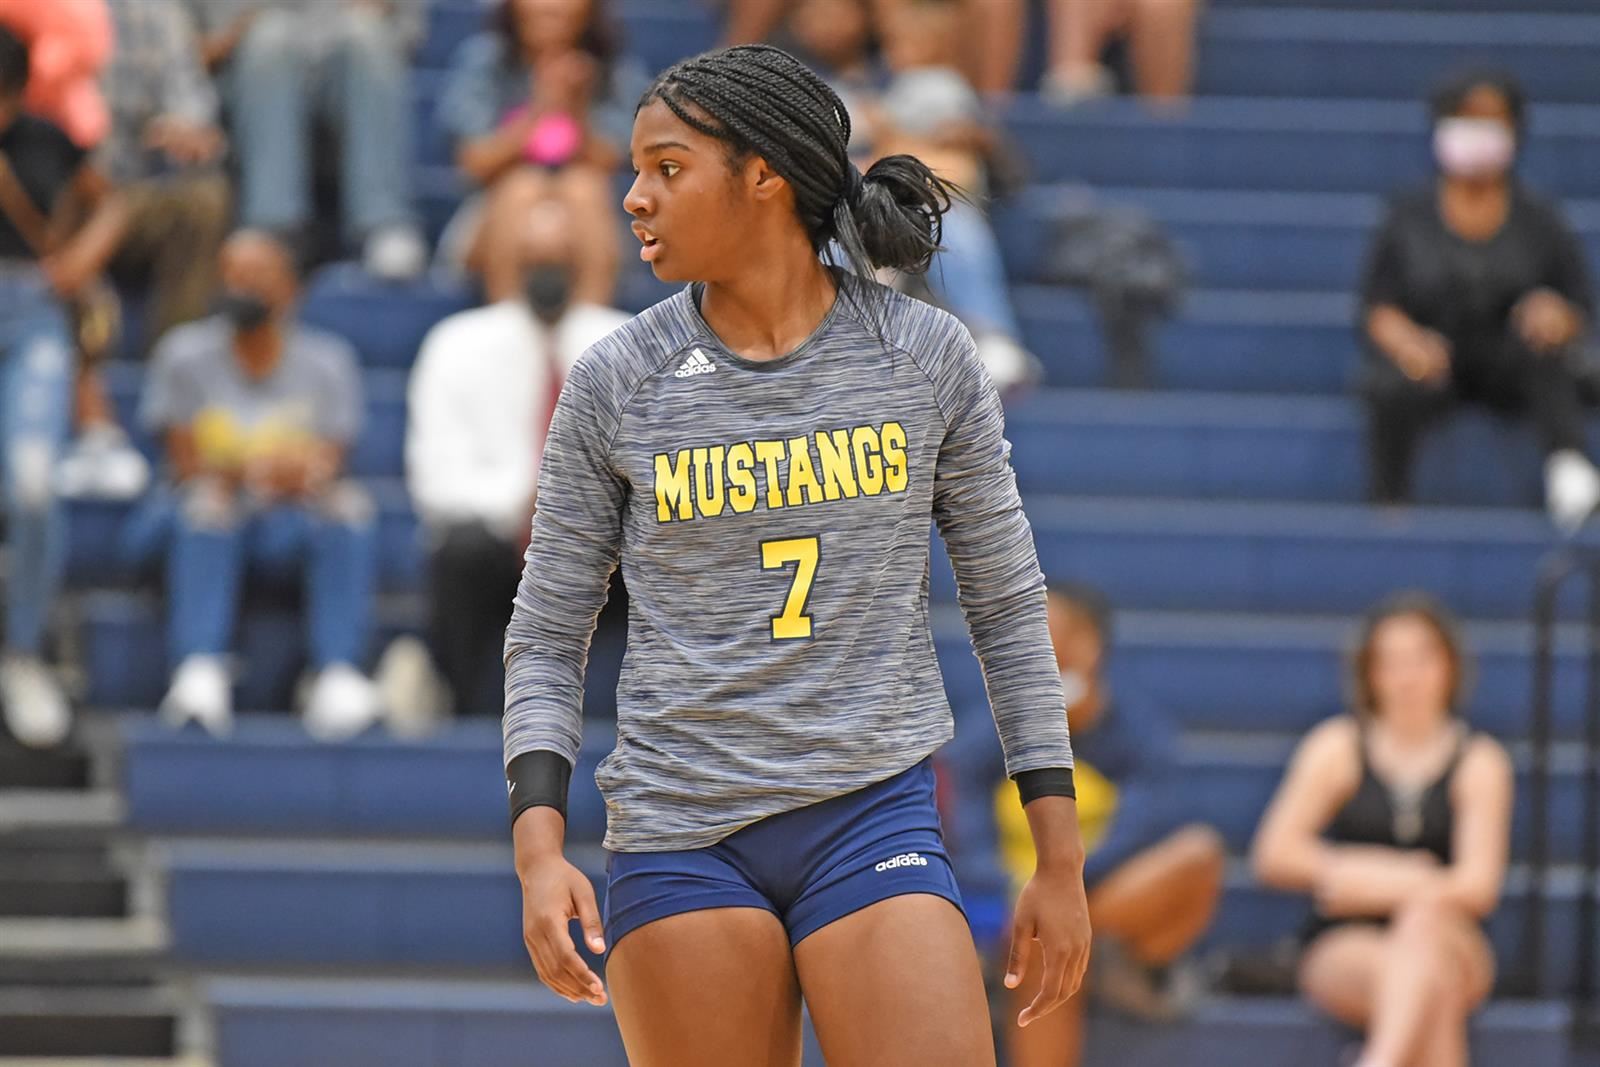 Cypress Ranch senior Kailee Gims’ postseason honors include being named to the AVCA All-American Team.